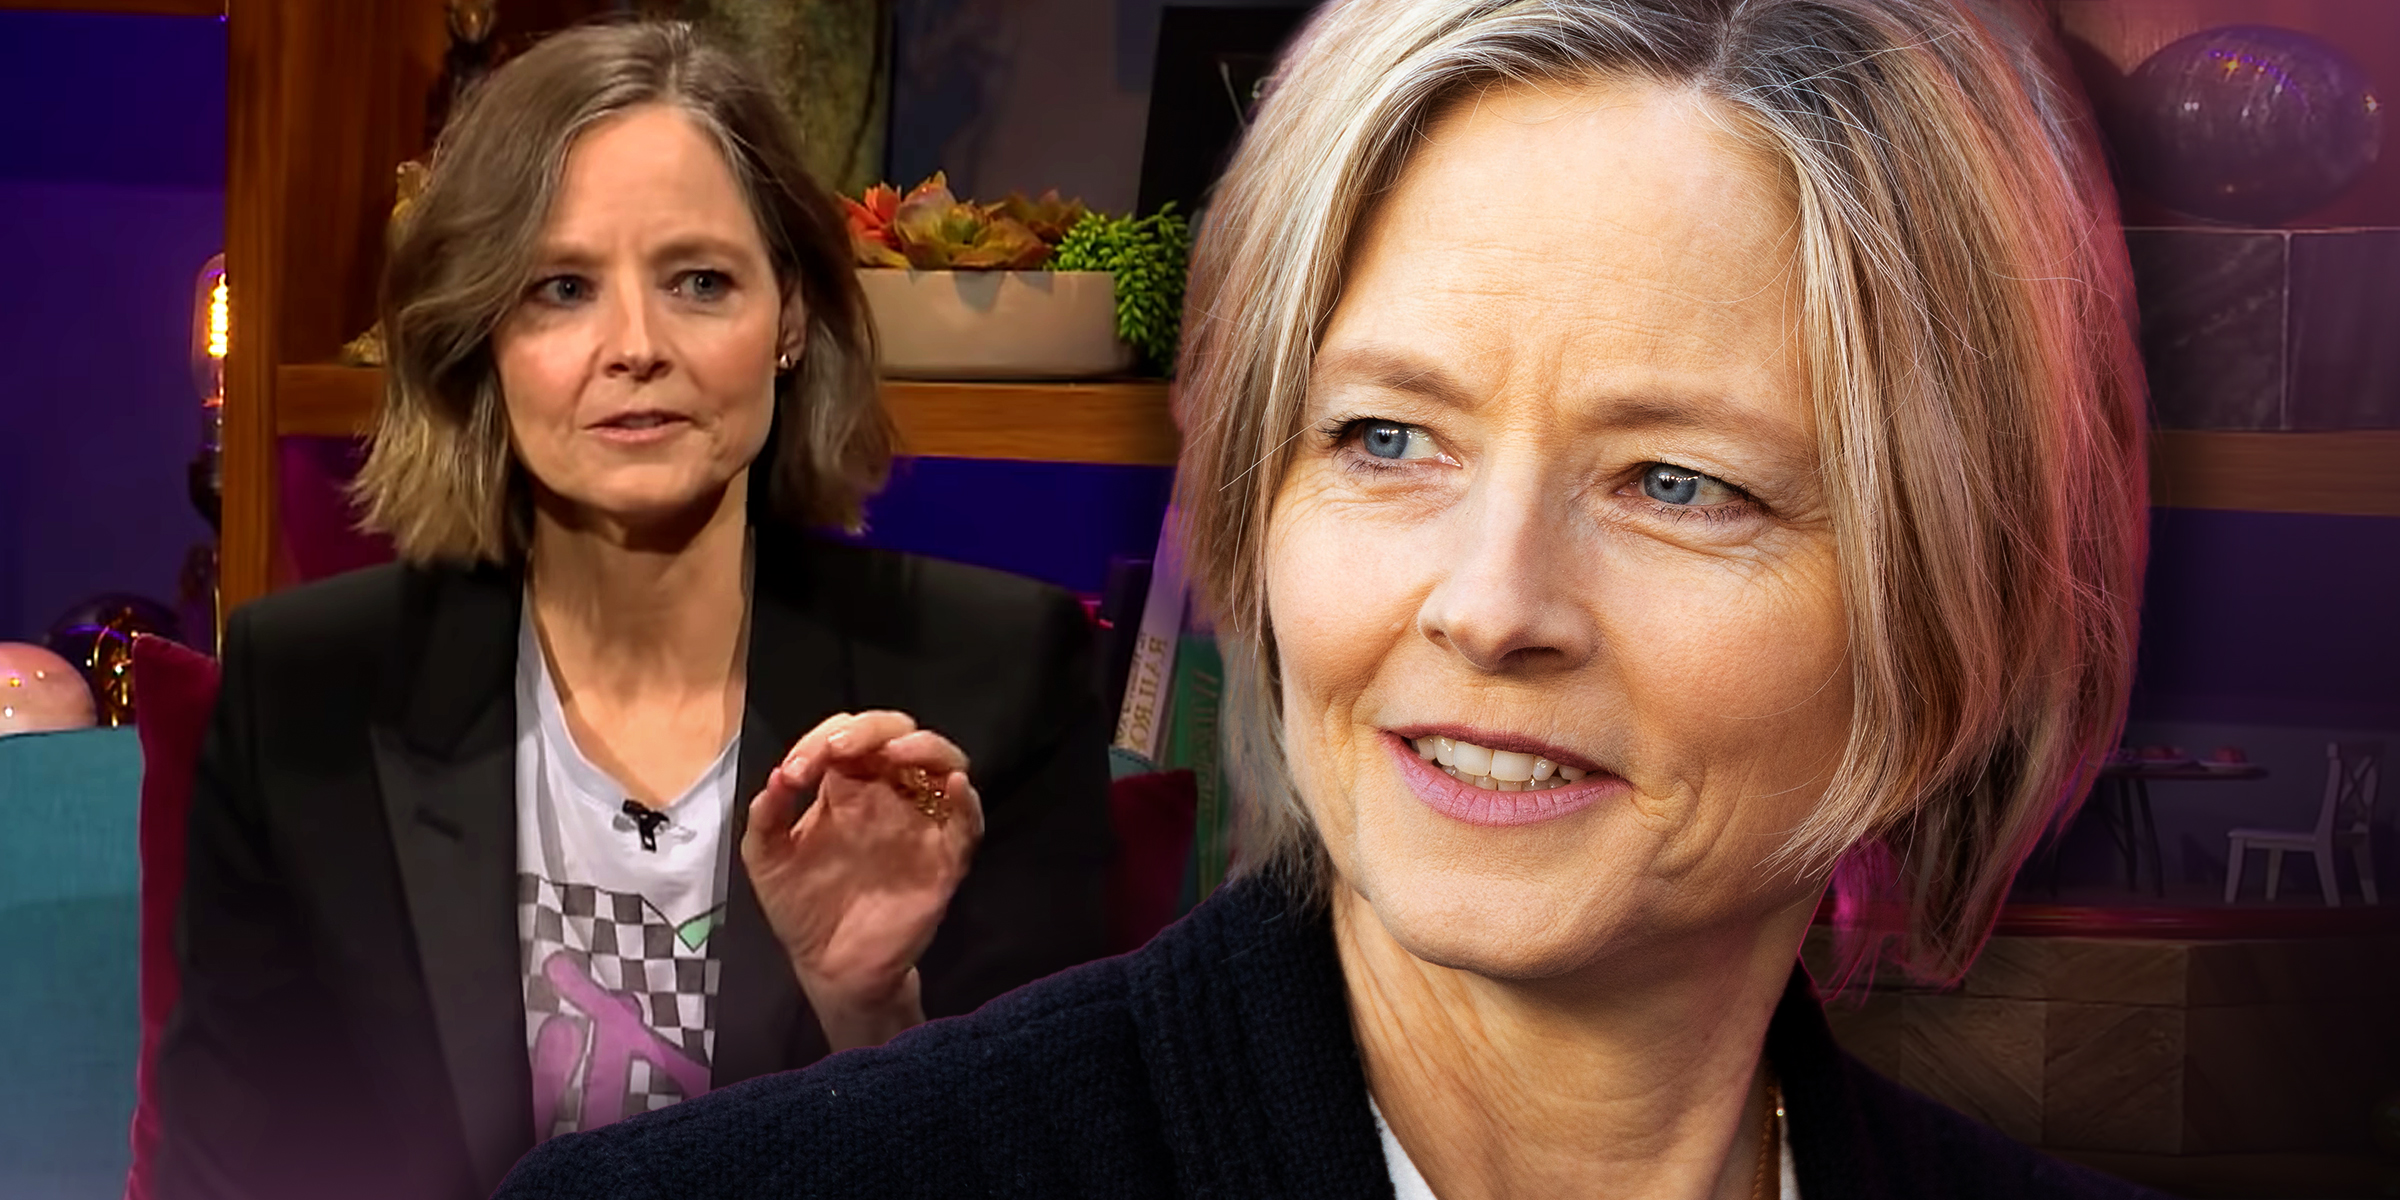 Jodie Foster | Source: Youtube.com/The Late Late Show with James Corden | Getty Images